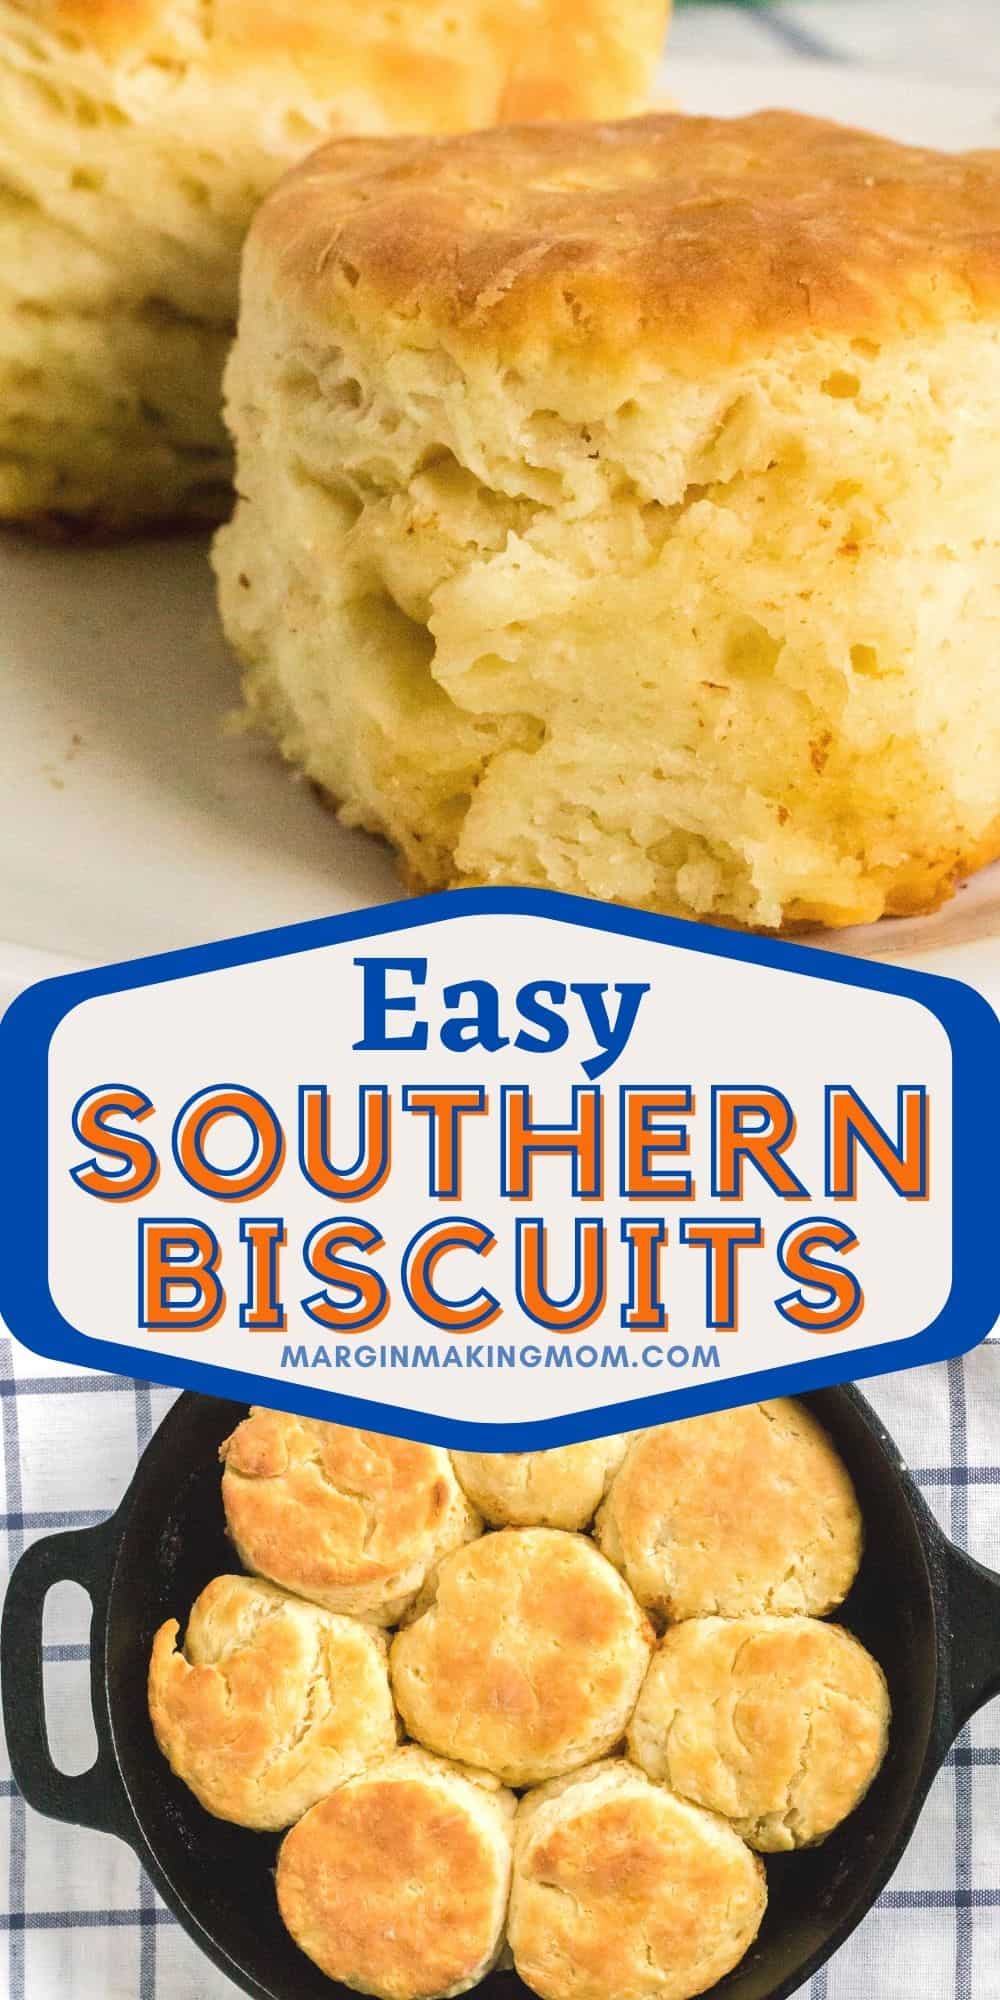 collage image featuring two photos of homemade biscuits. One is a side view close-up of a biscuit, while the other photo is of biscuits baked in a cast iron skillet.